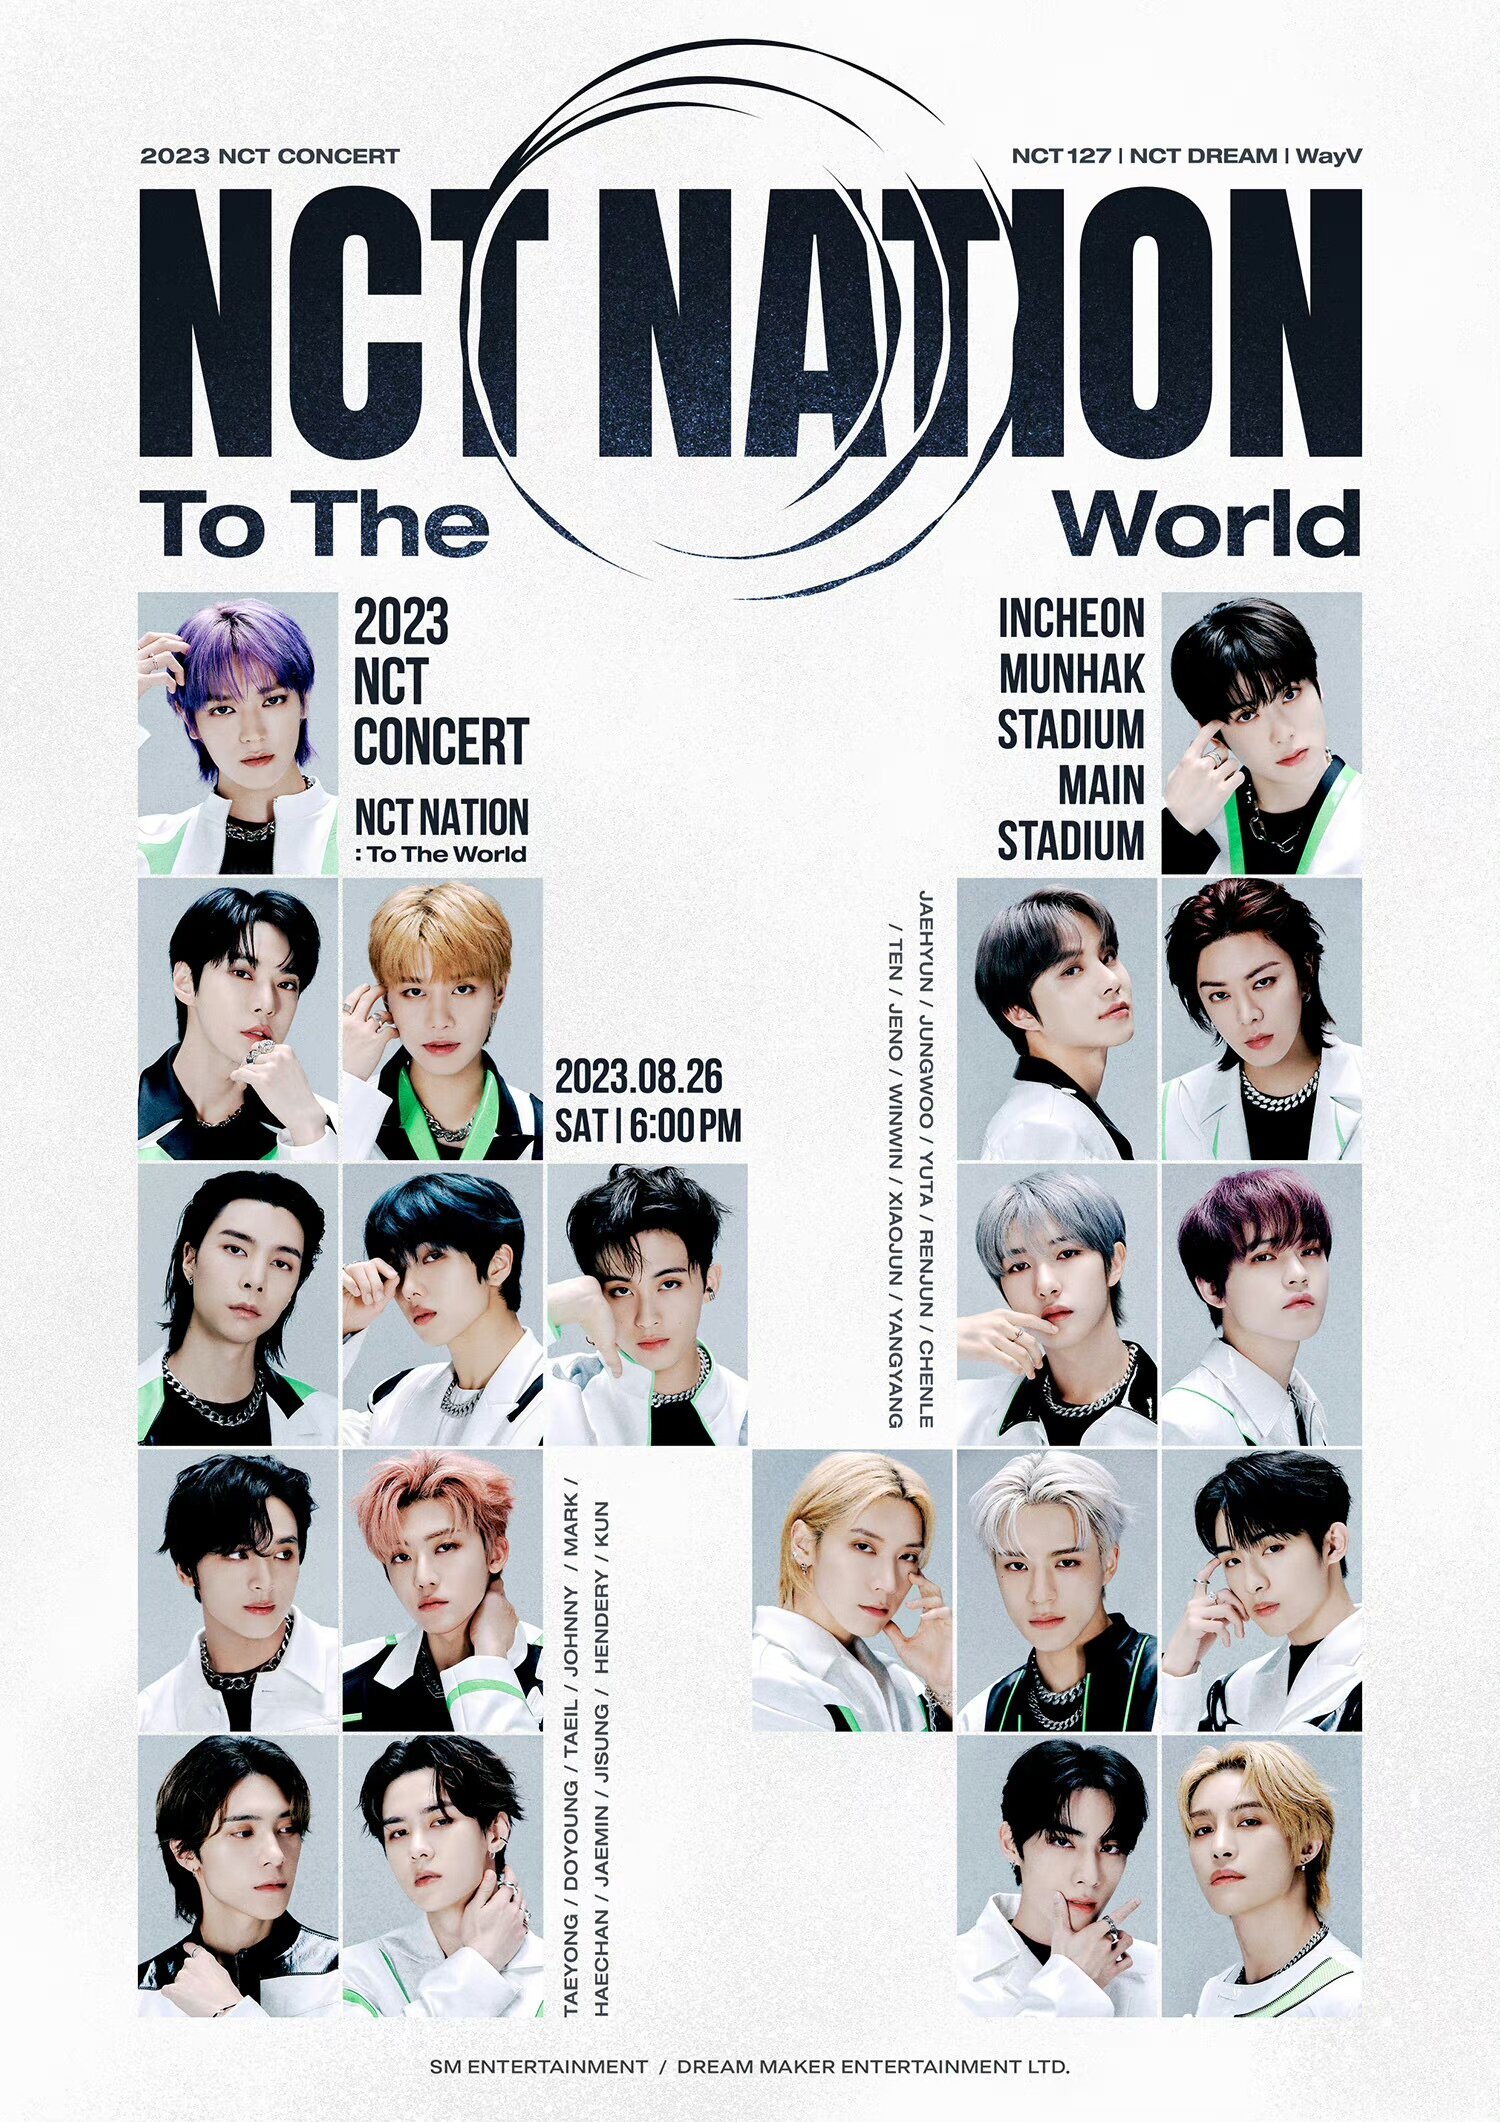 NCT 2023 'NCT Nation' concert promo pics | kpopping